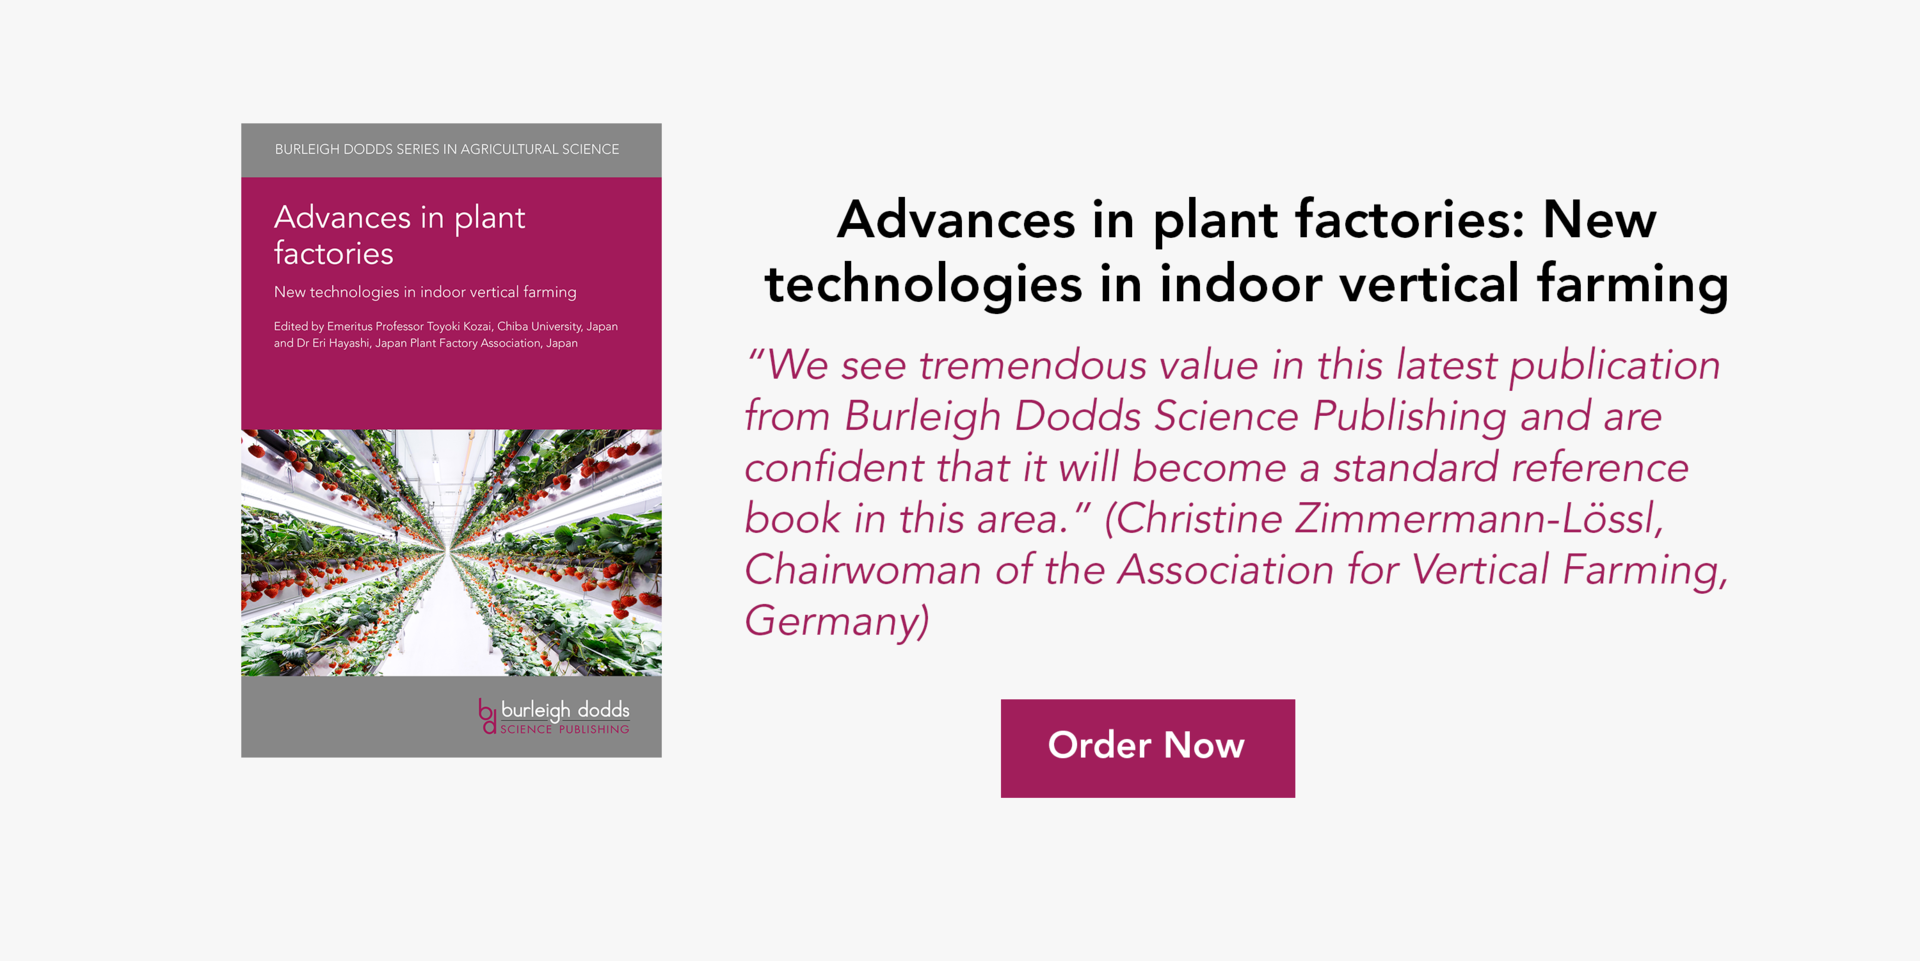 Advances in plant factories: New technologies in indoor vertical farming